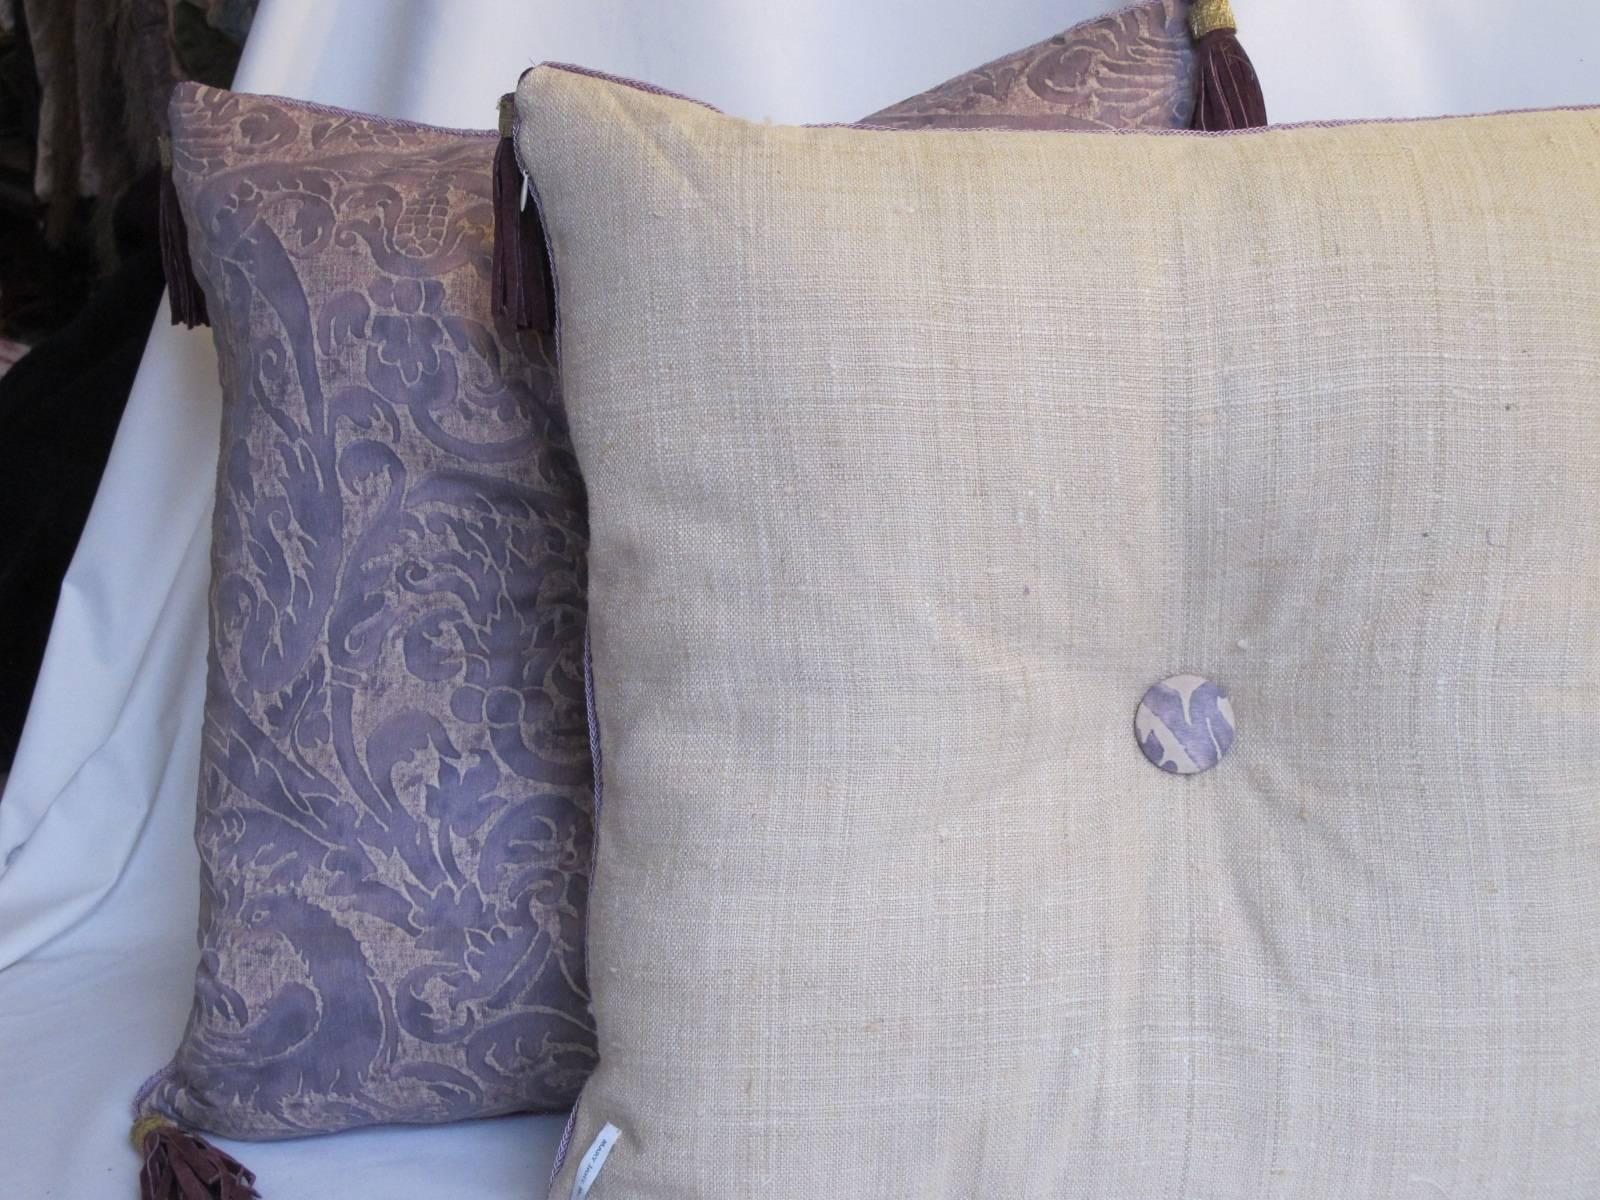 Newly made pillows from a Midcentury authentic Fortuny fabric. they are backed with a natural raw silk and are embelished with handmade leather tassels.